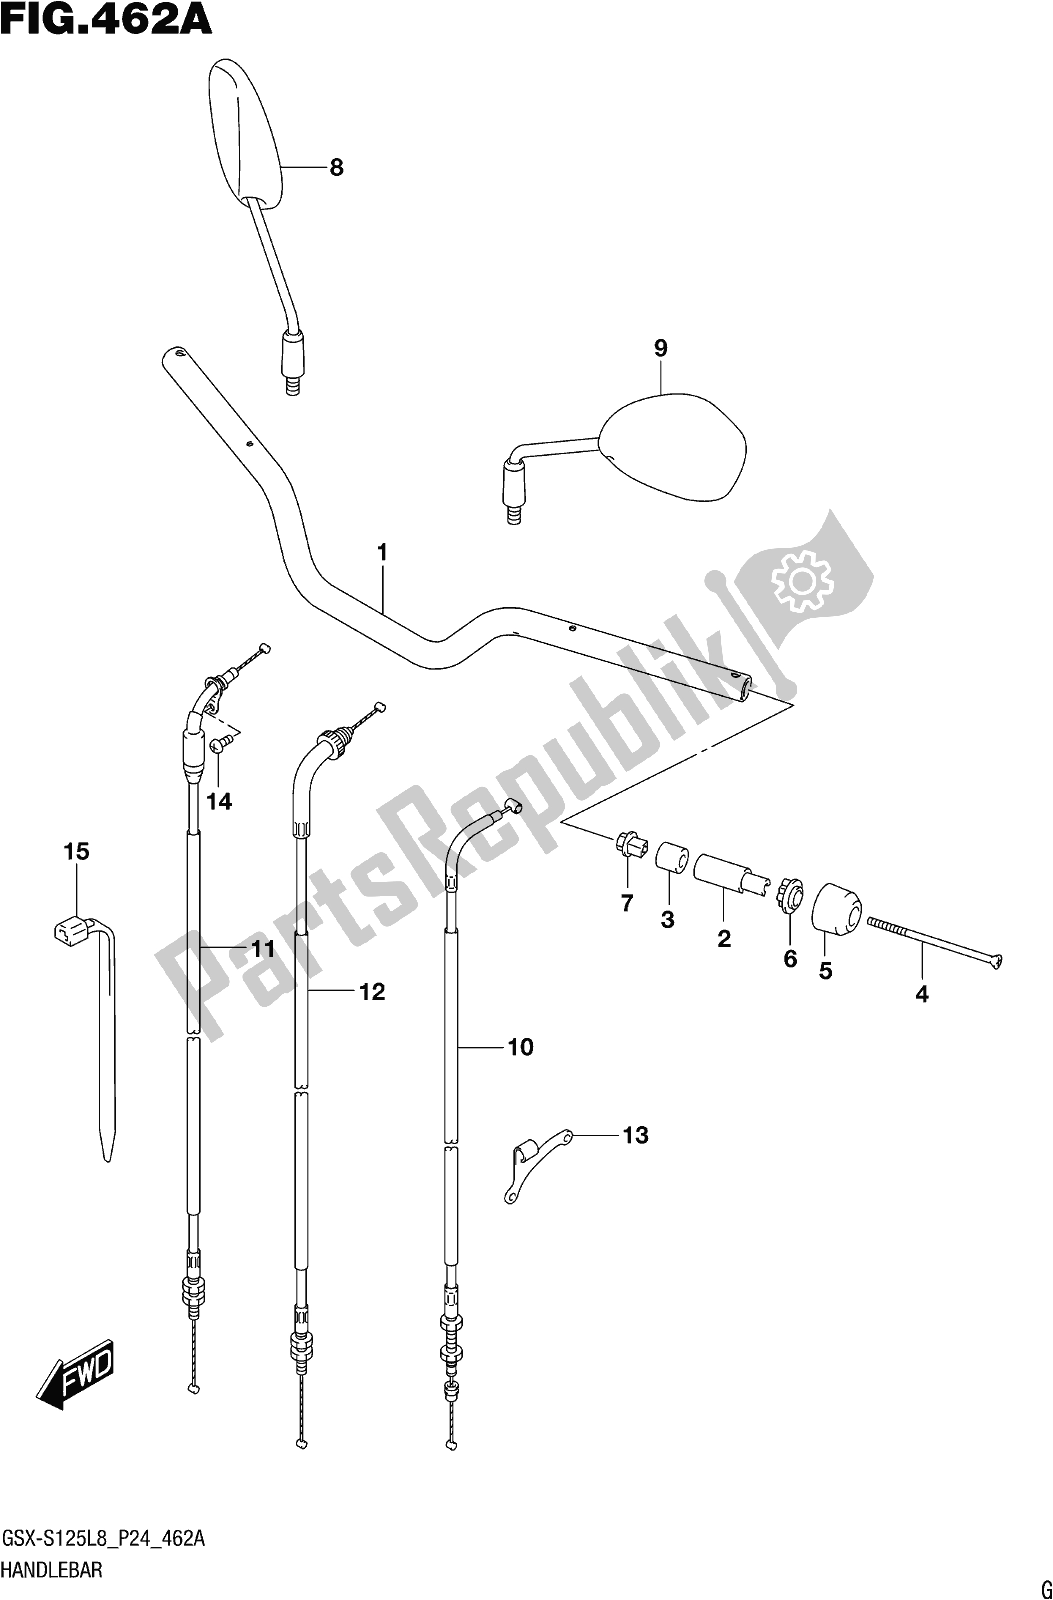 All parts for the Fig. 462a Handlebar of the Suzuki Gsx-s 125 MLX 2018